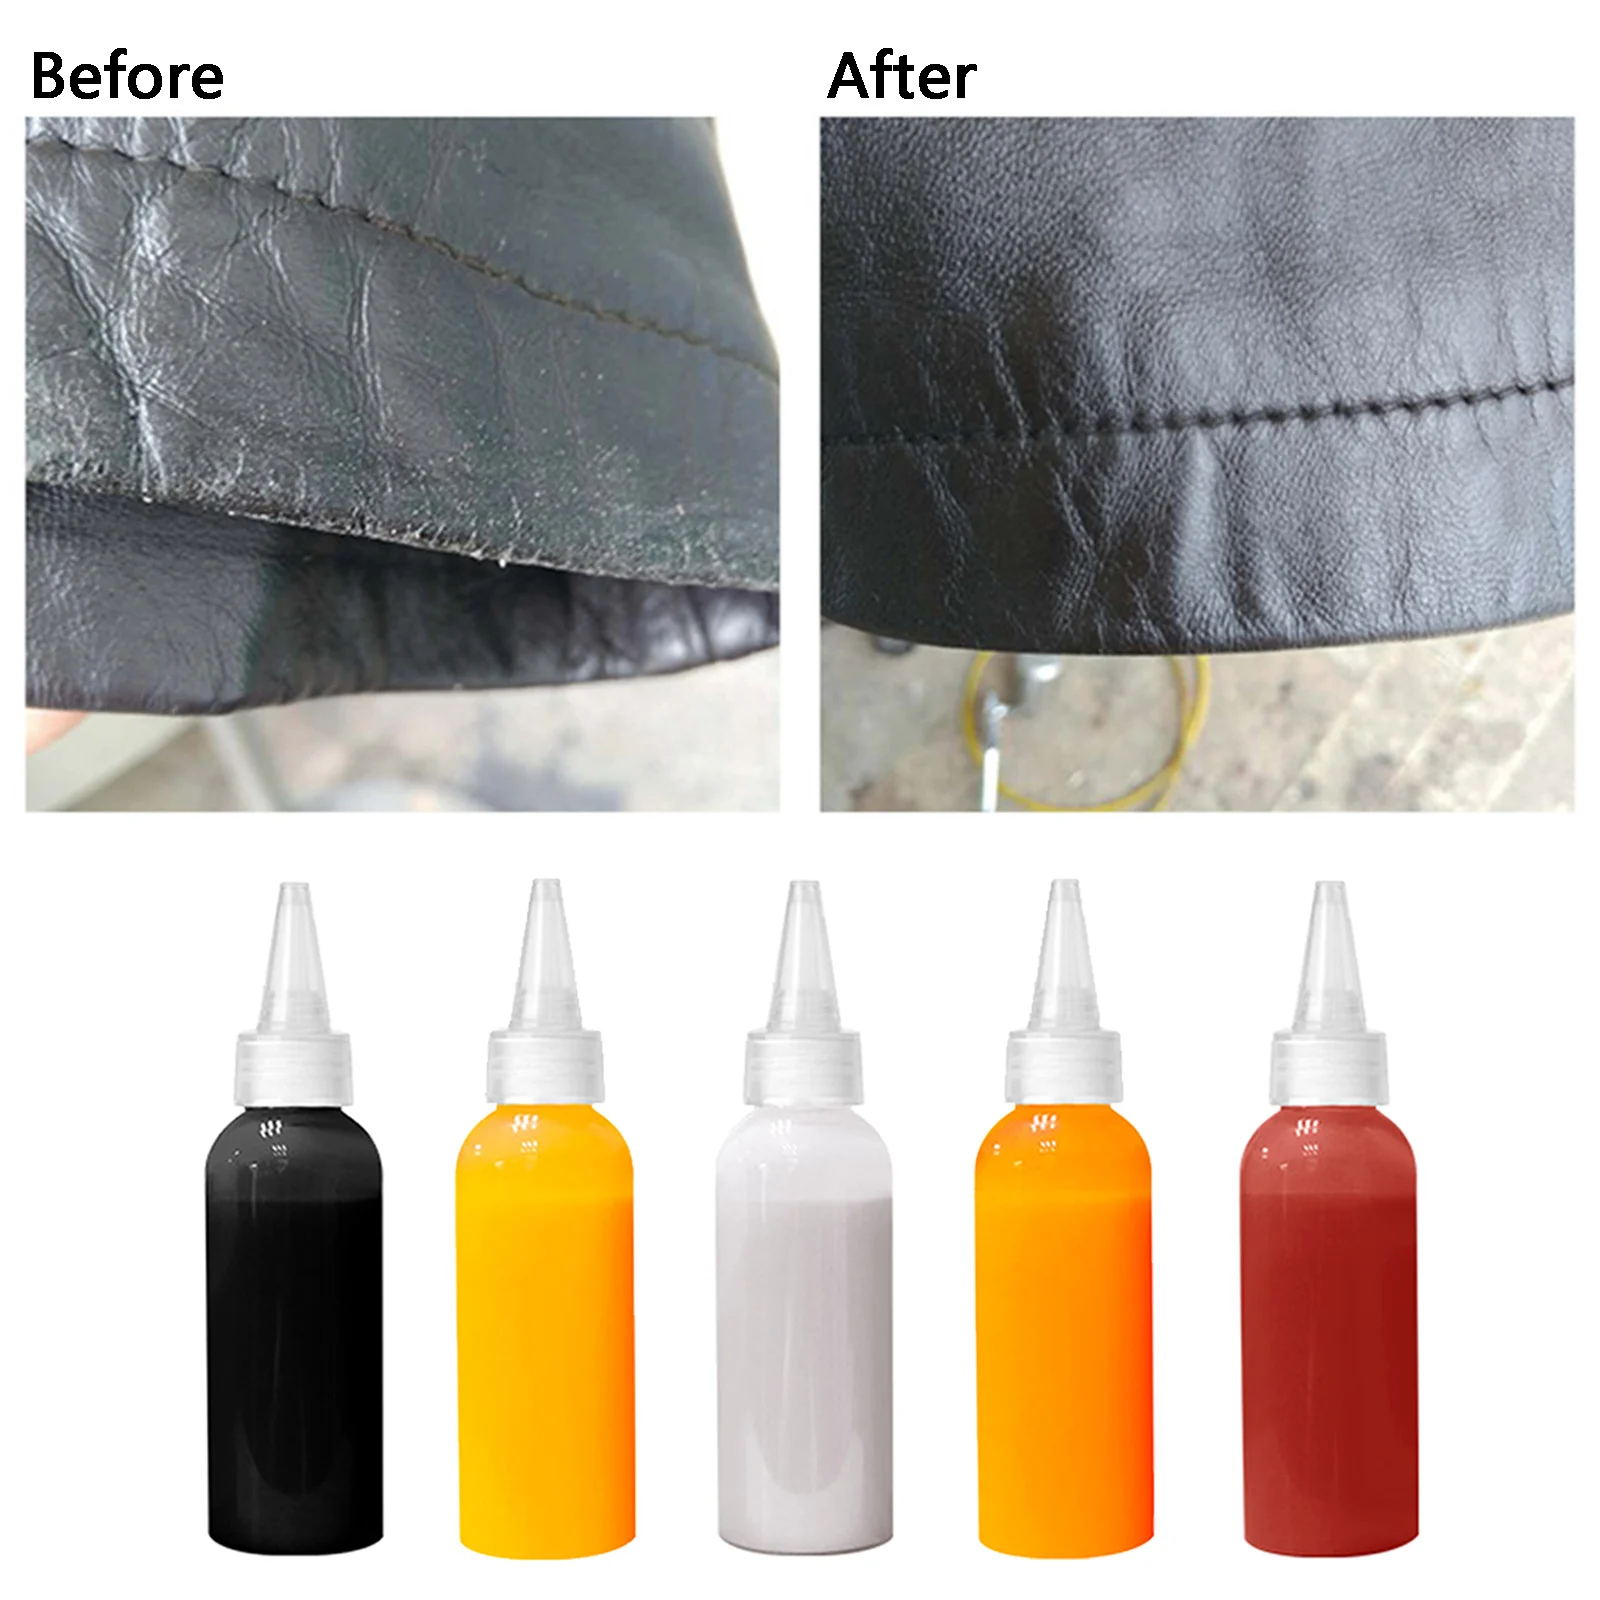 100ml Leather Dye Paint Oily DIY Professional Paint Leather Craft Leather Bag Sofa Shoes Repair Complementary Color Paste